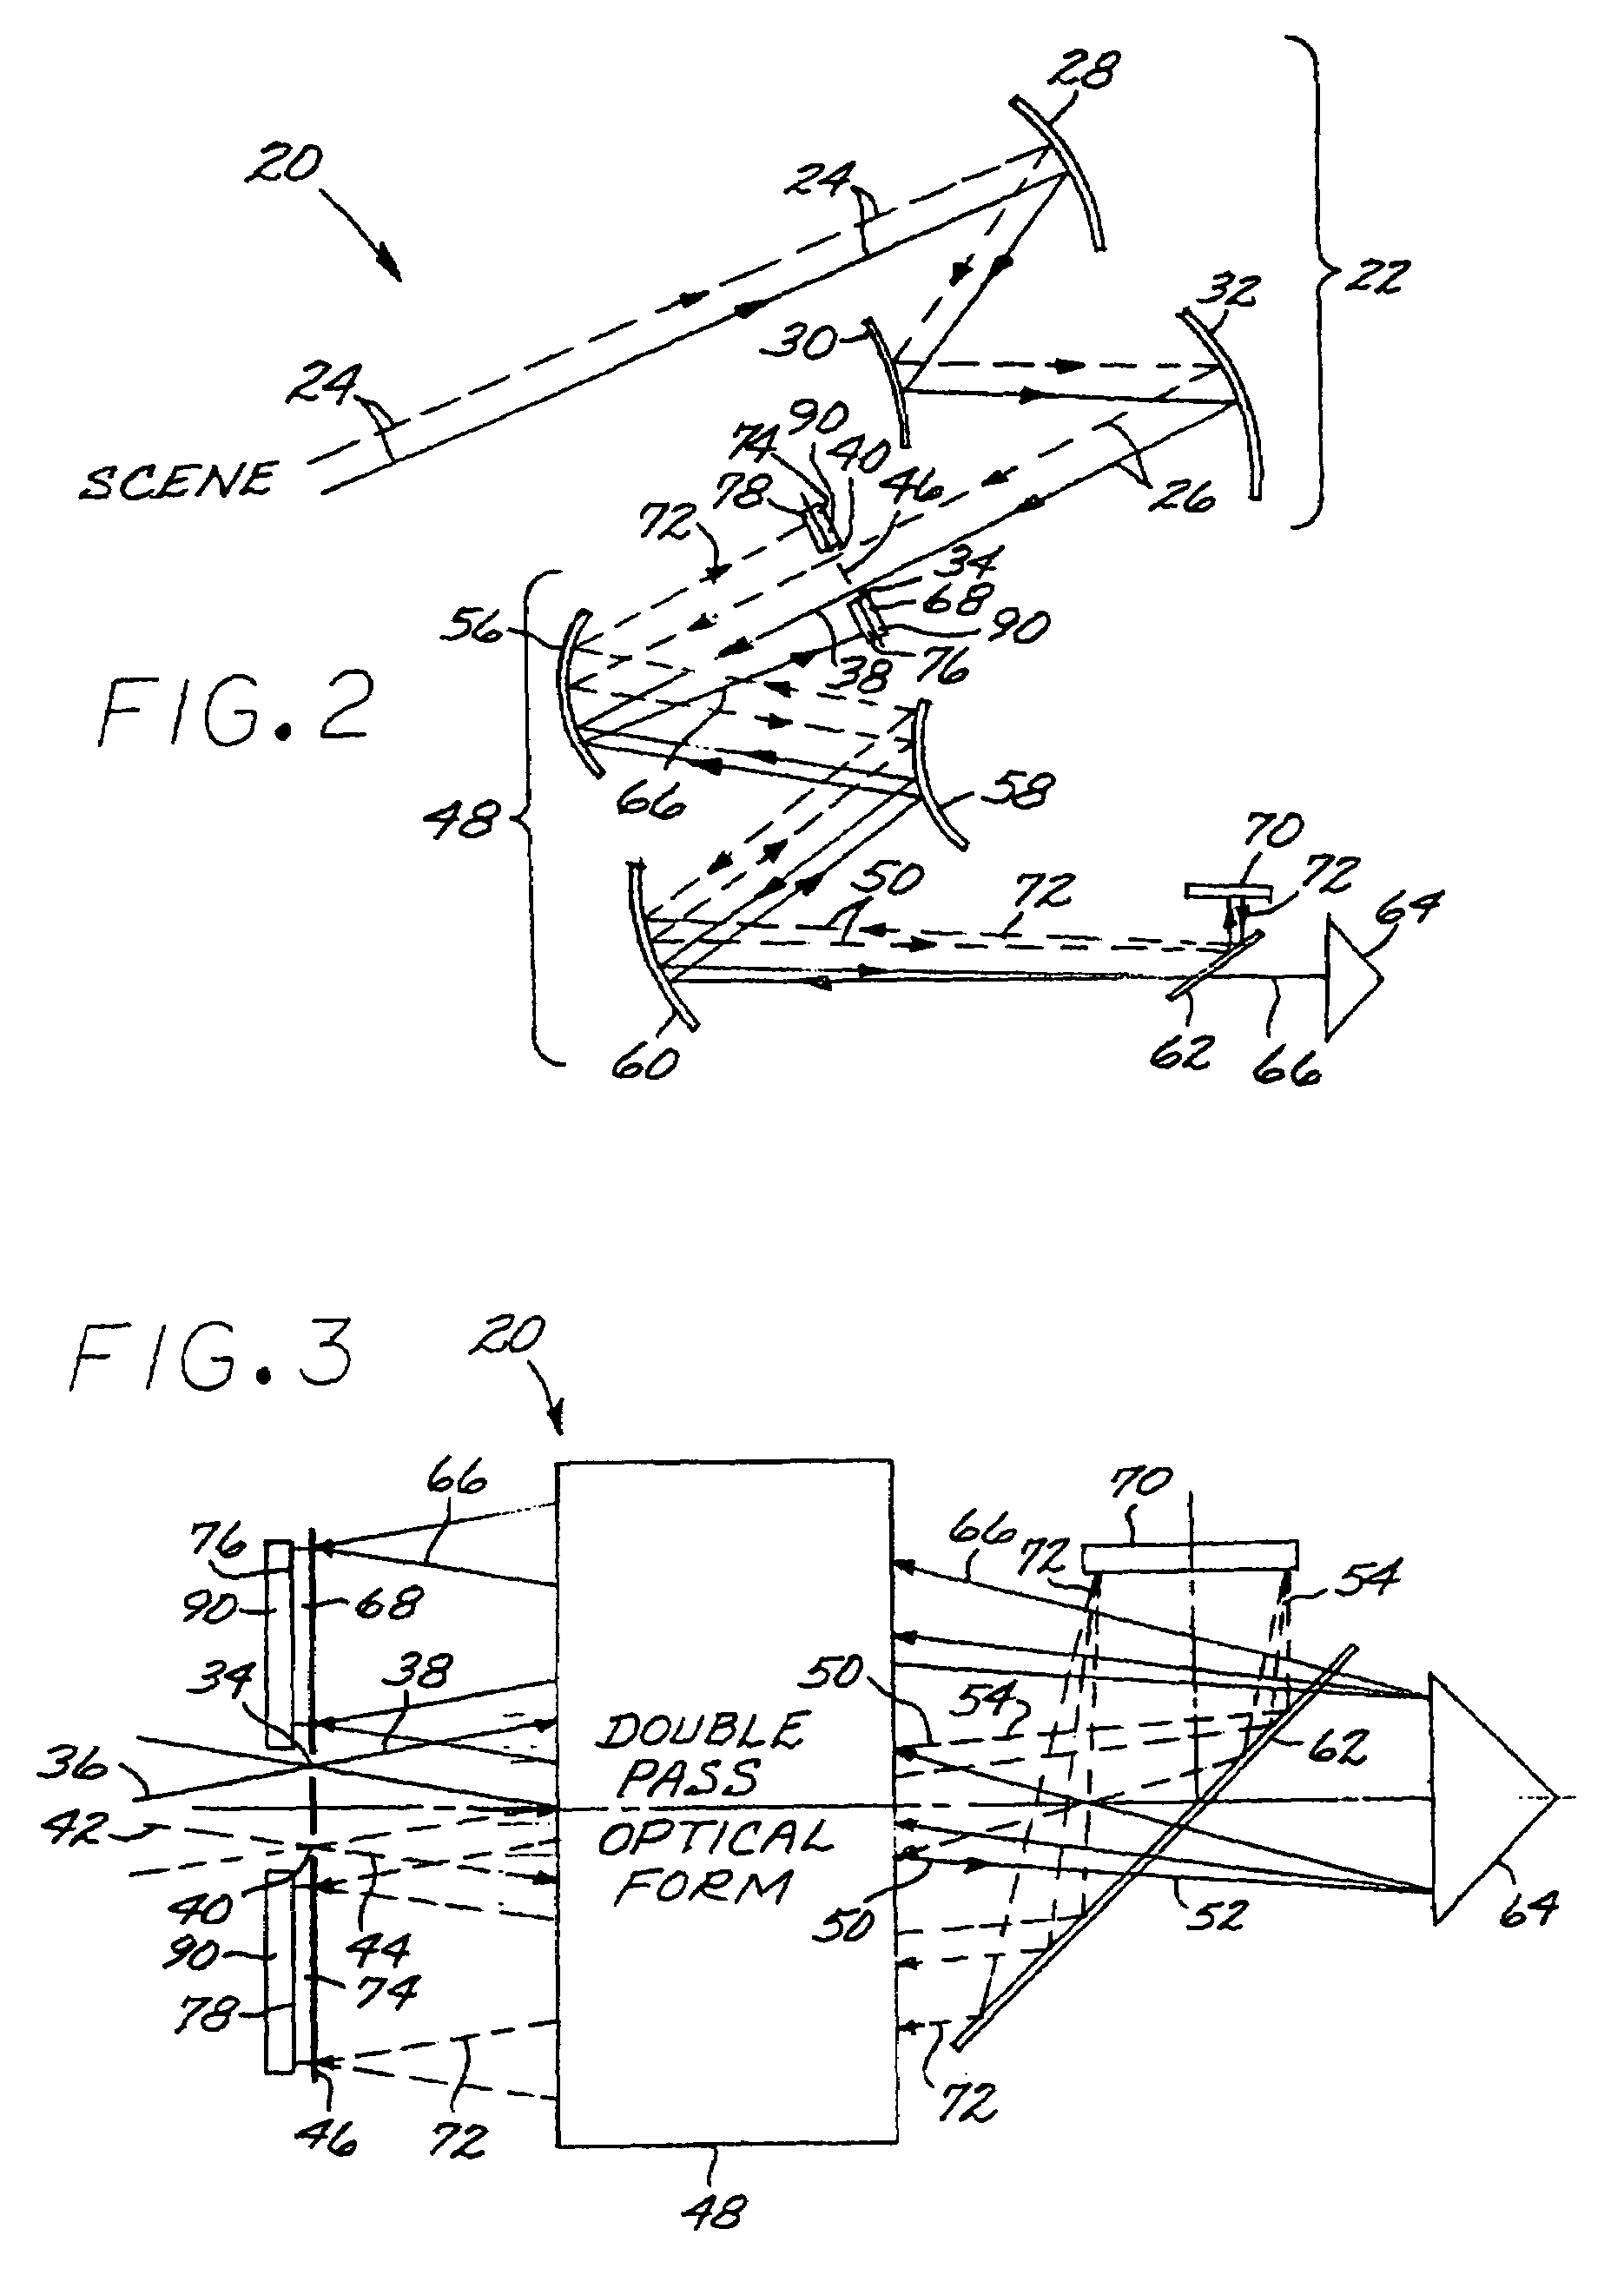 Two-channel imaging spectrometer utilizing shared objective, collimating, and imaging optics